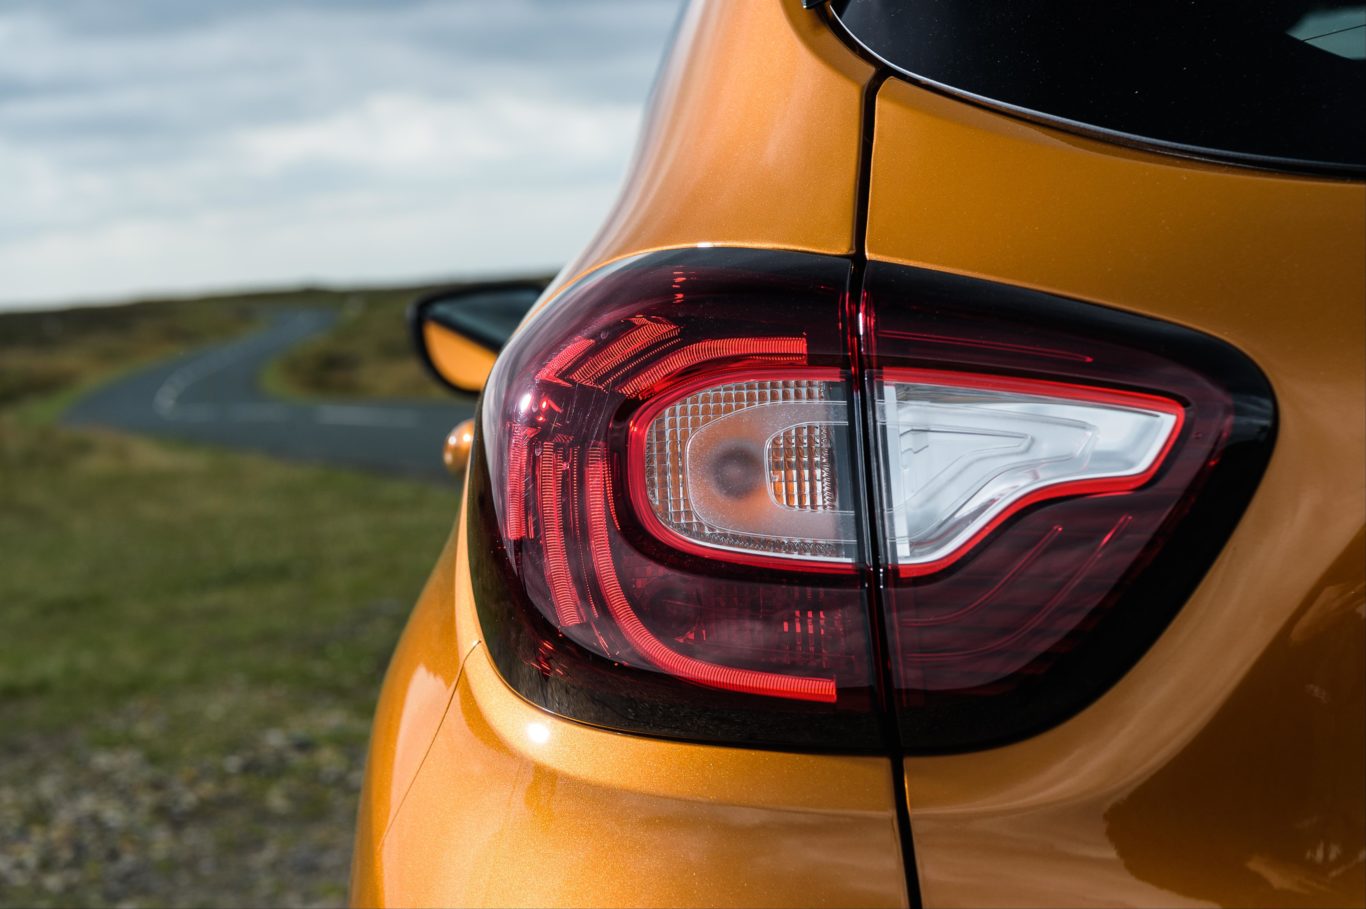 Sharp rear lights give the Captur a strong long